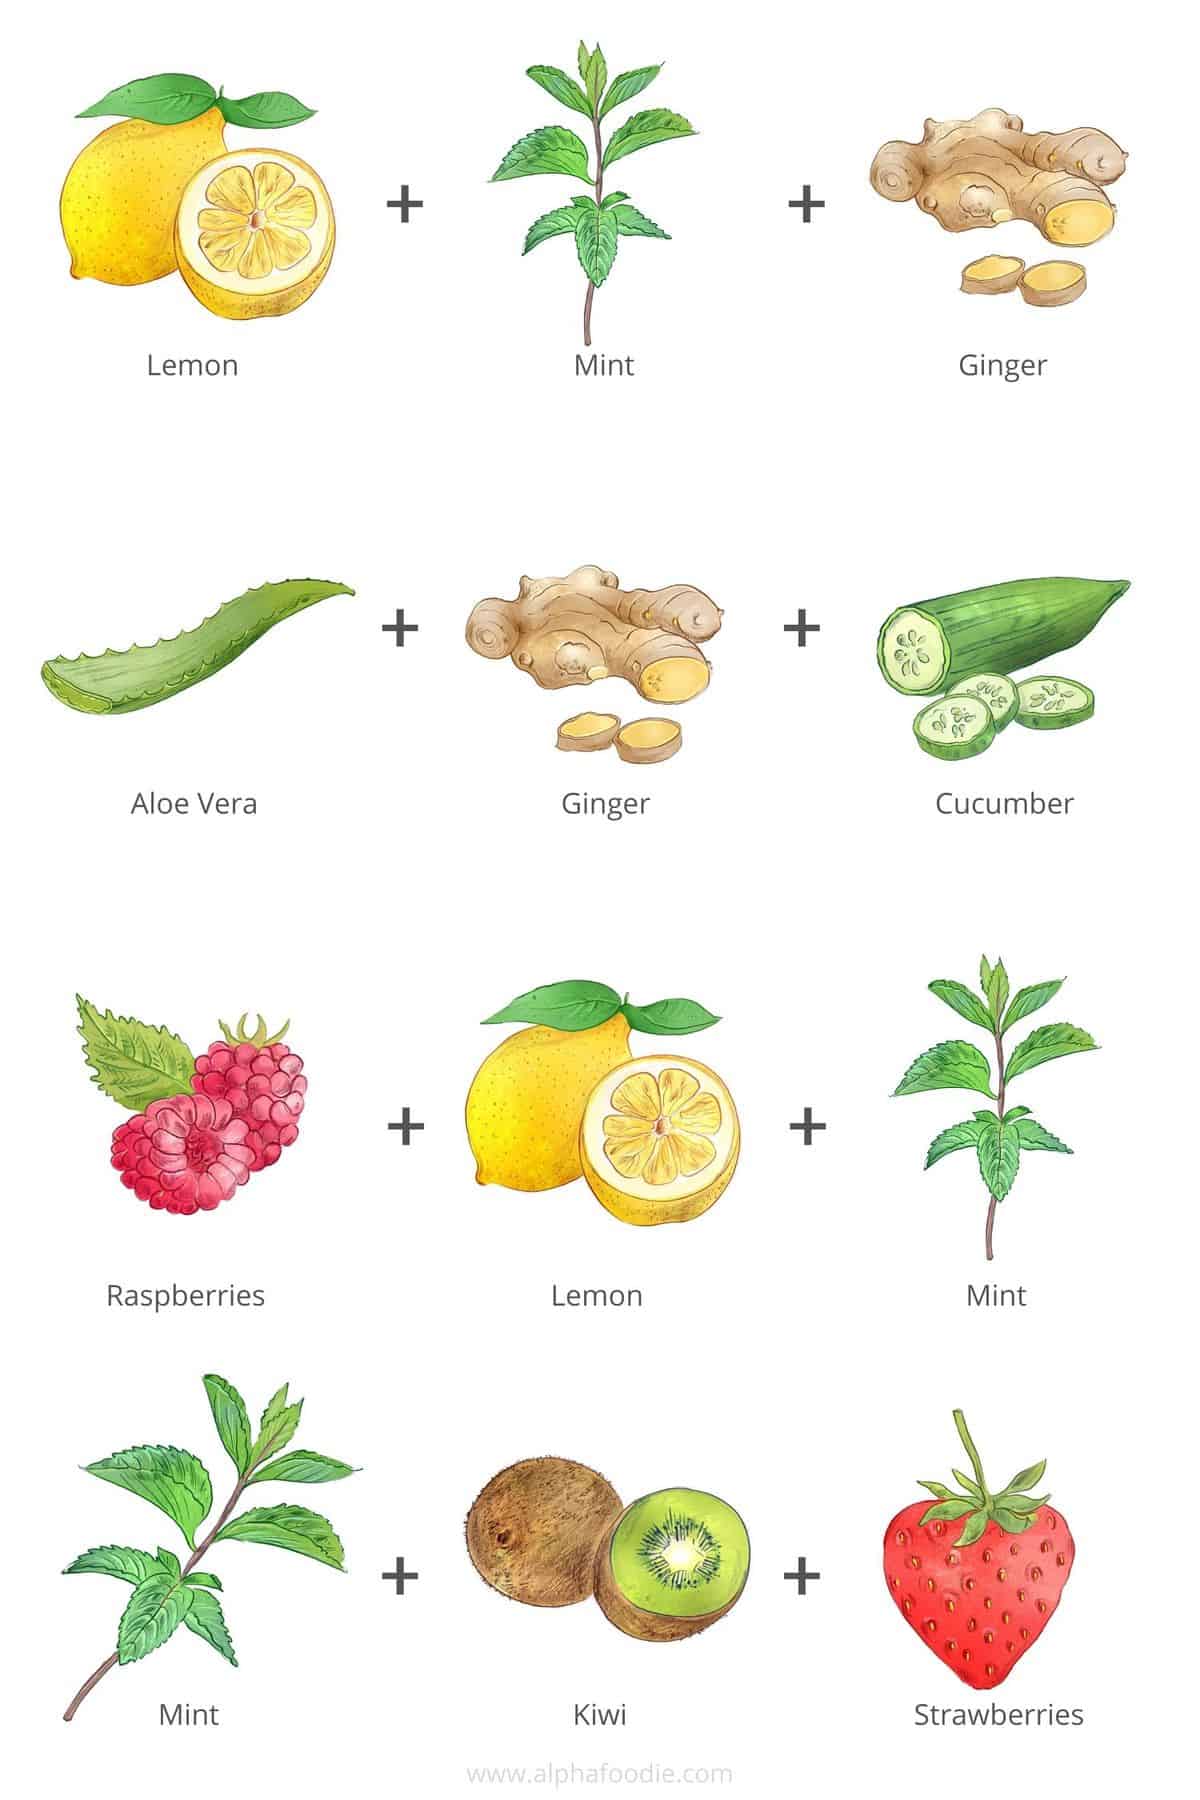 Drawings of fruit and spices for flavored water combinations